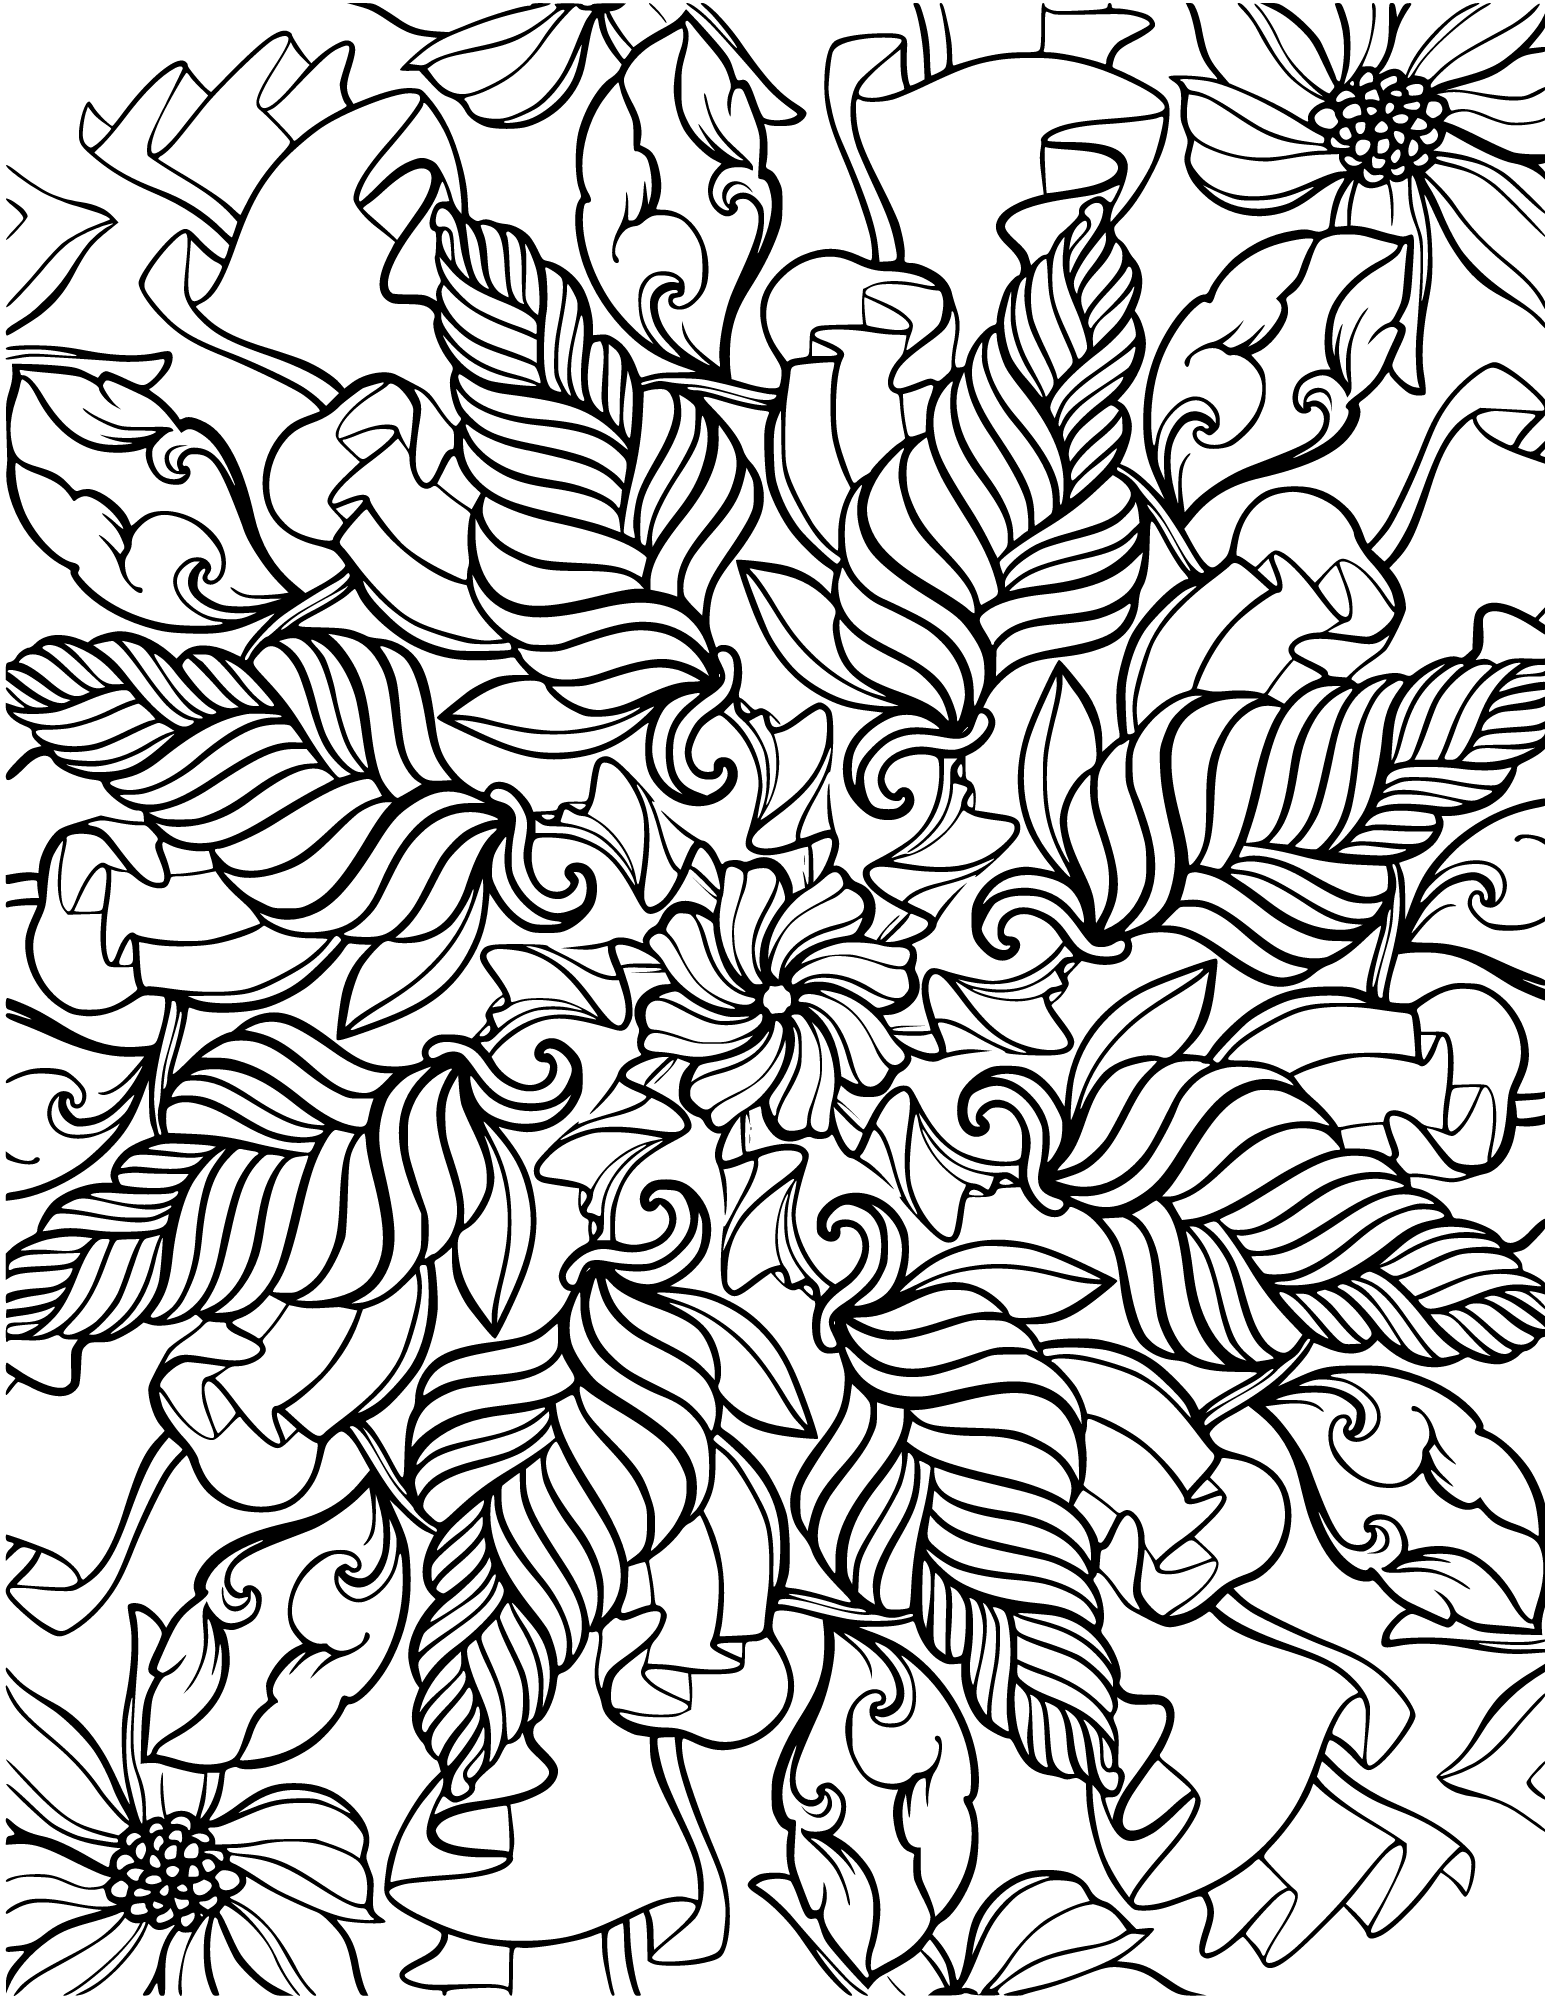 Zentangle full coloring page